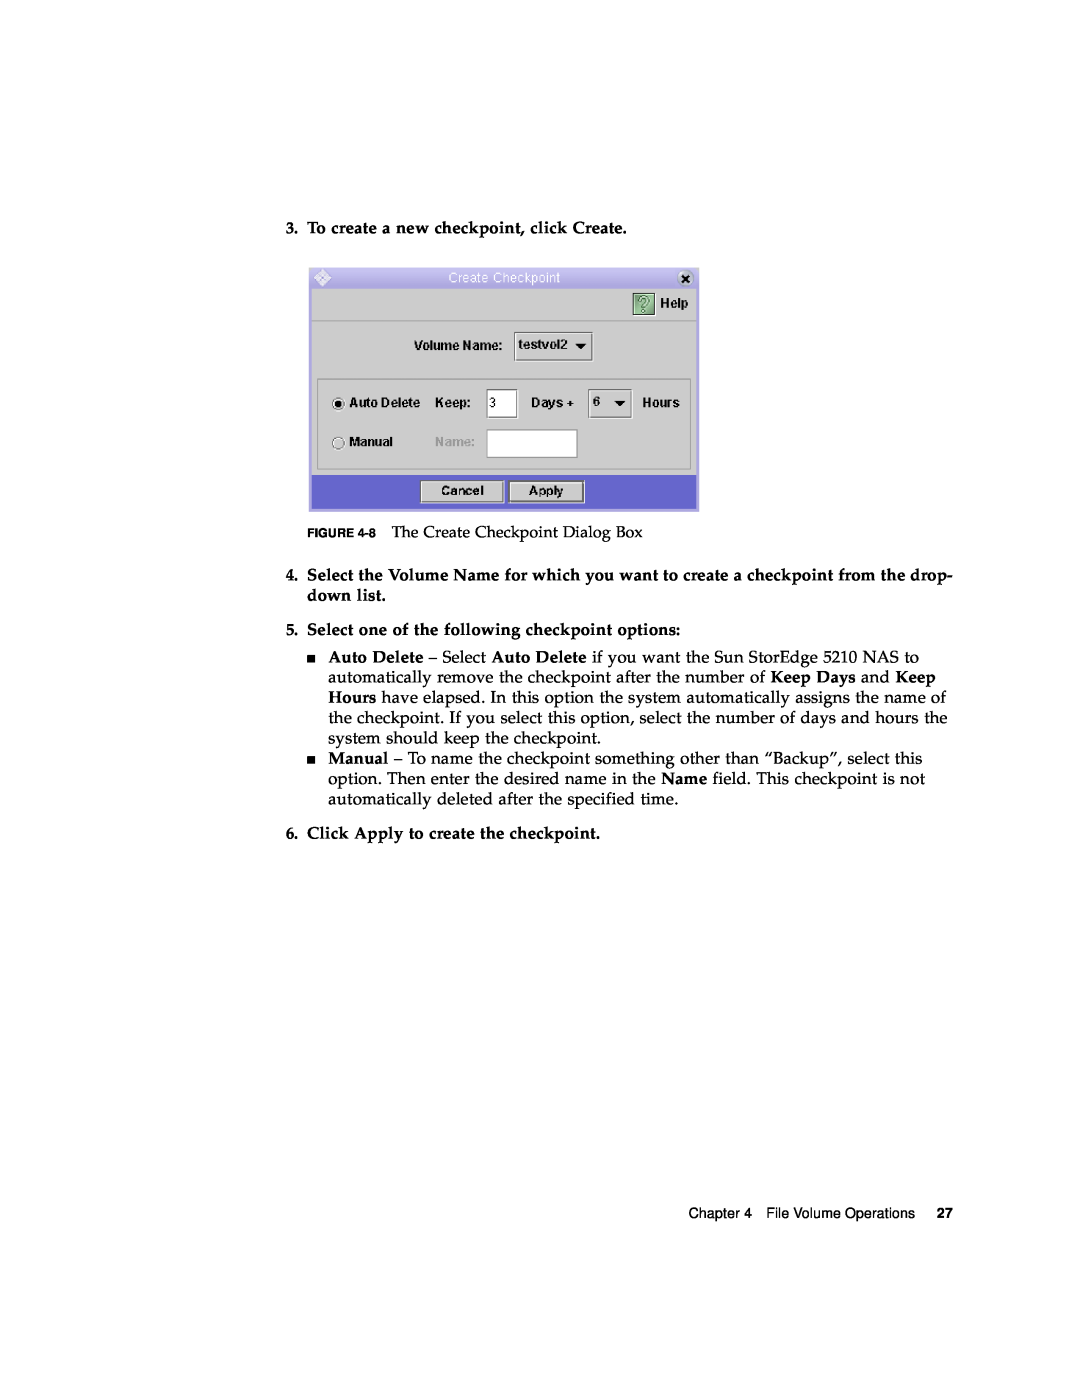 Sun Microsystems 5210 NAS manual To create a new checkpoint, click Create, Select one of the following checkpoint options 